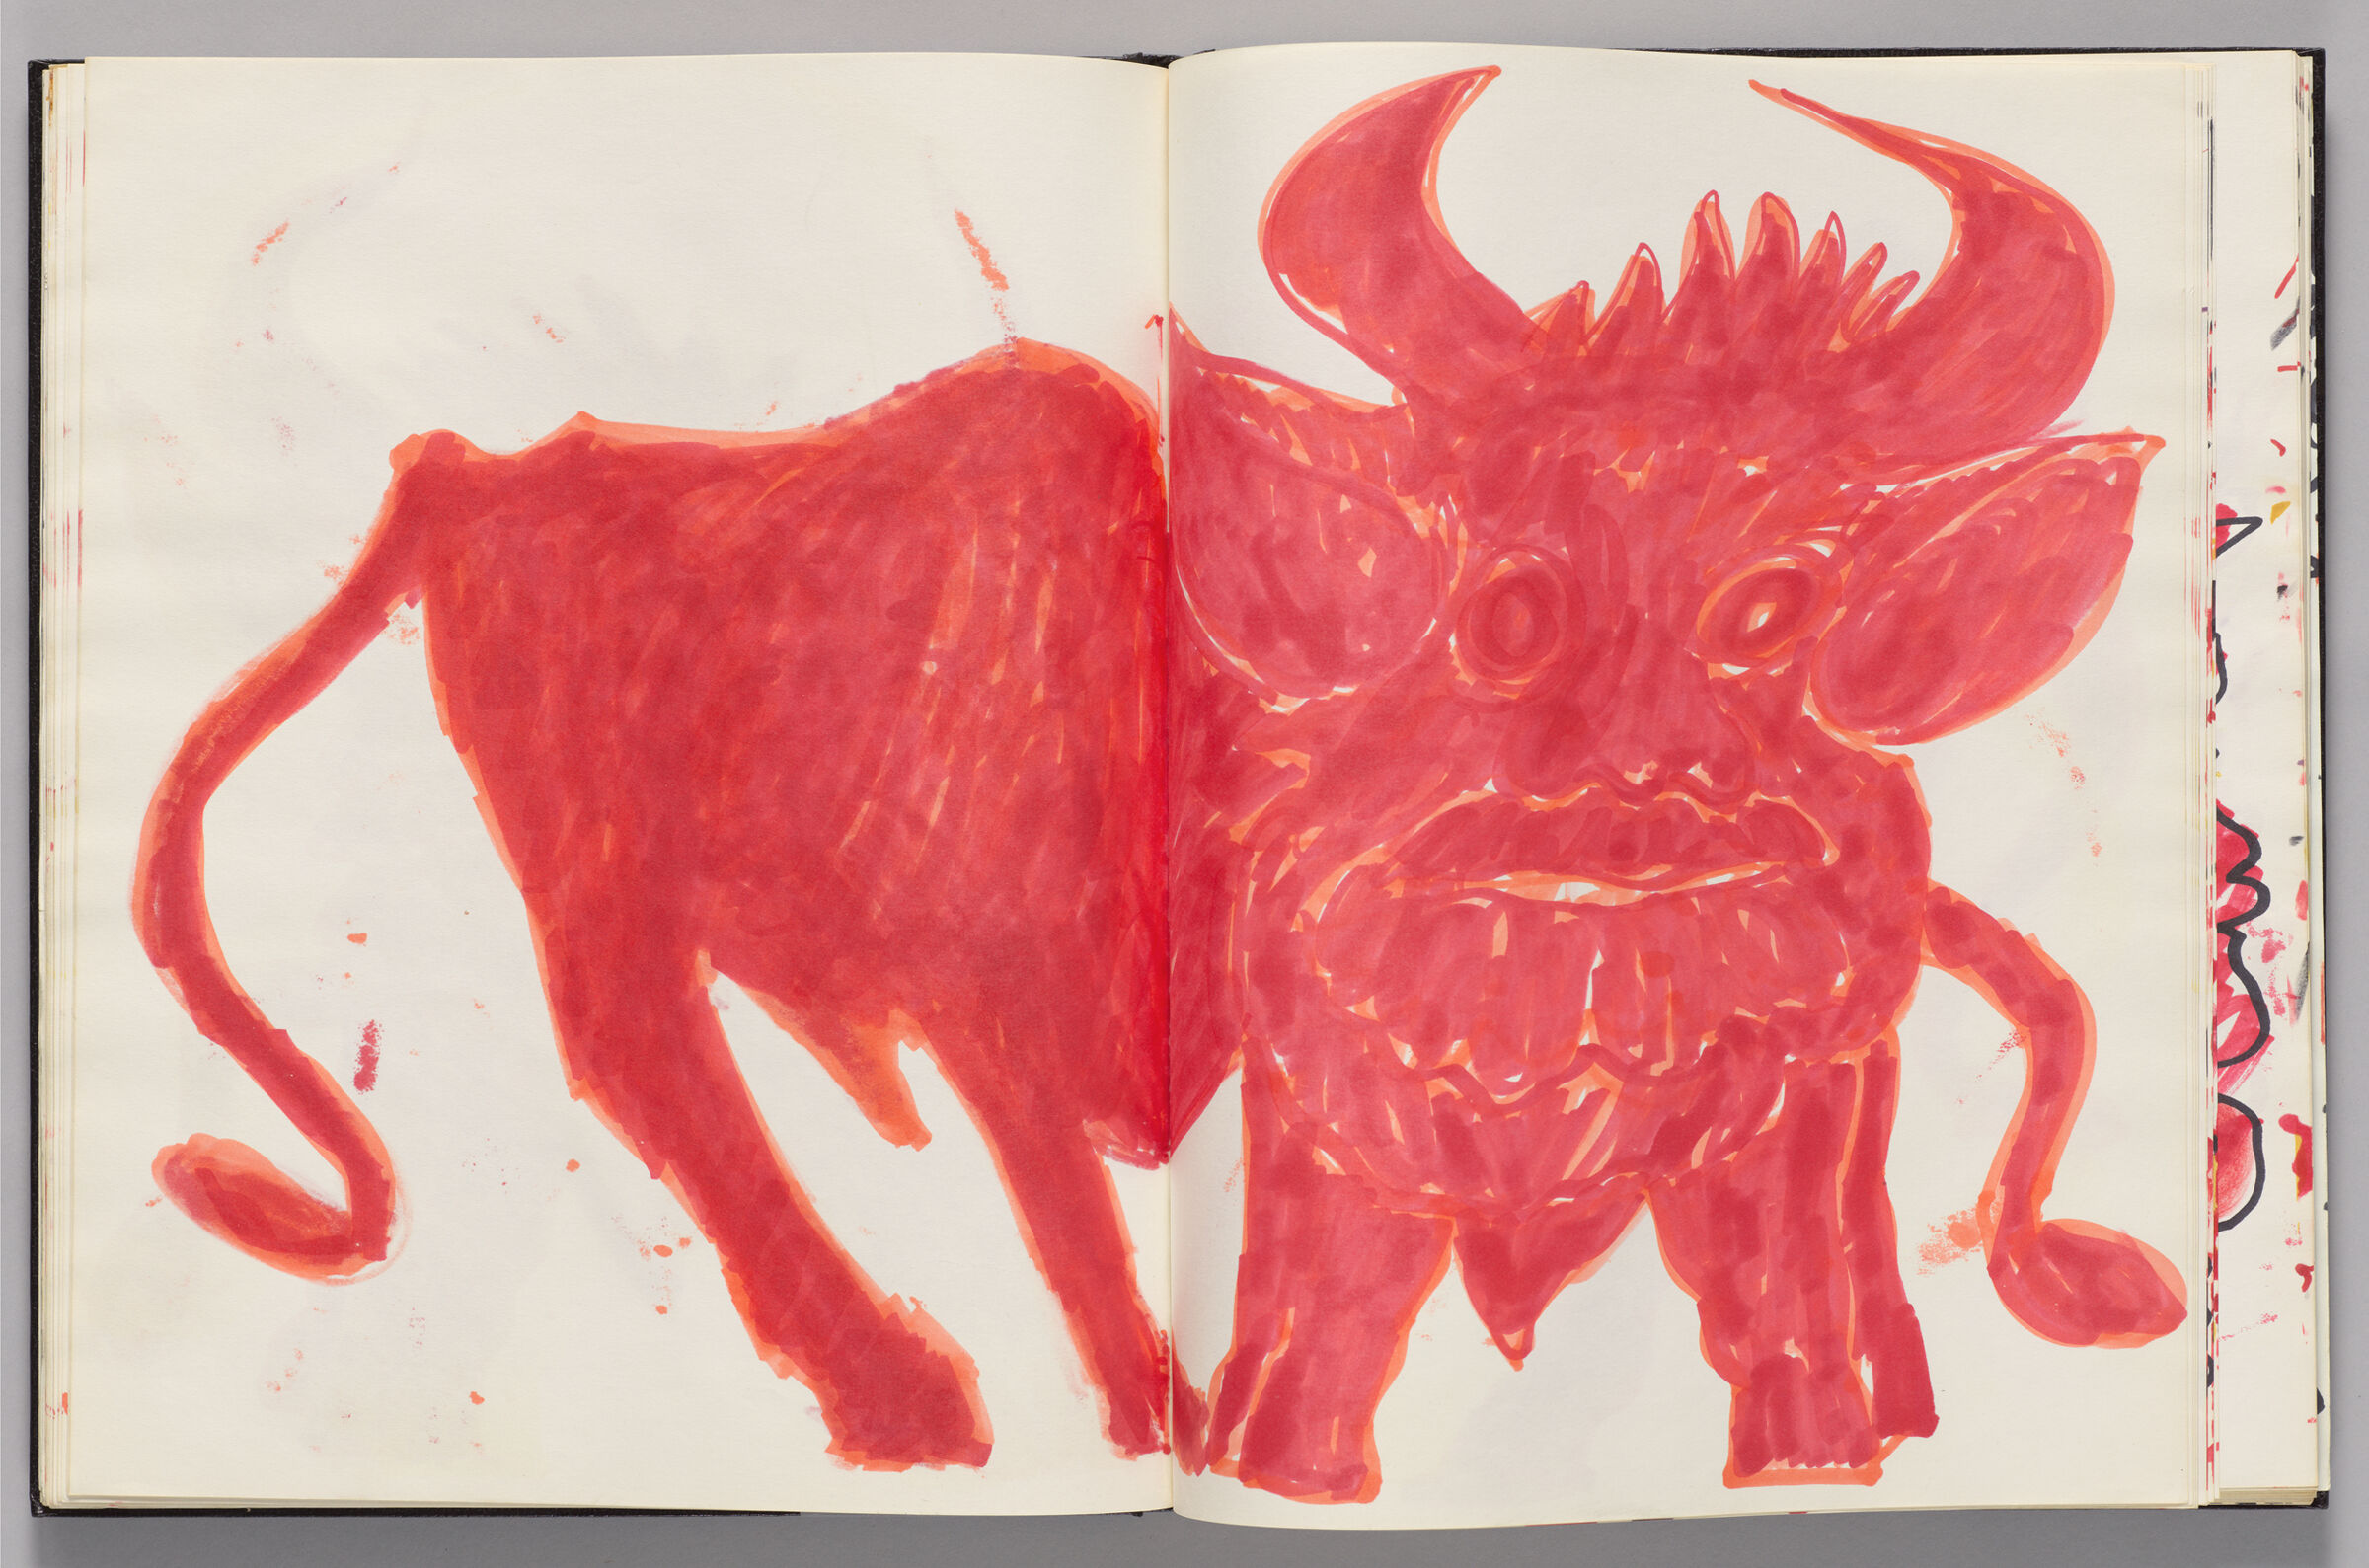 Untitled (Bleed-Through Of Minotaur Body Connected To Minotaur Head, Two-Page Spread)